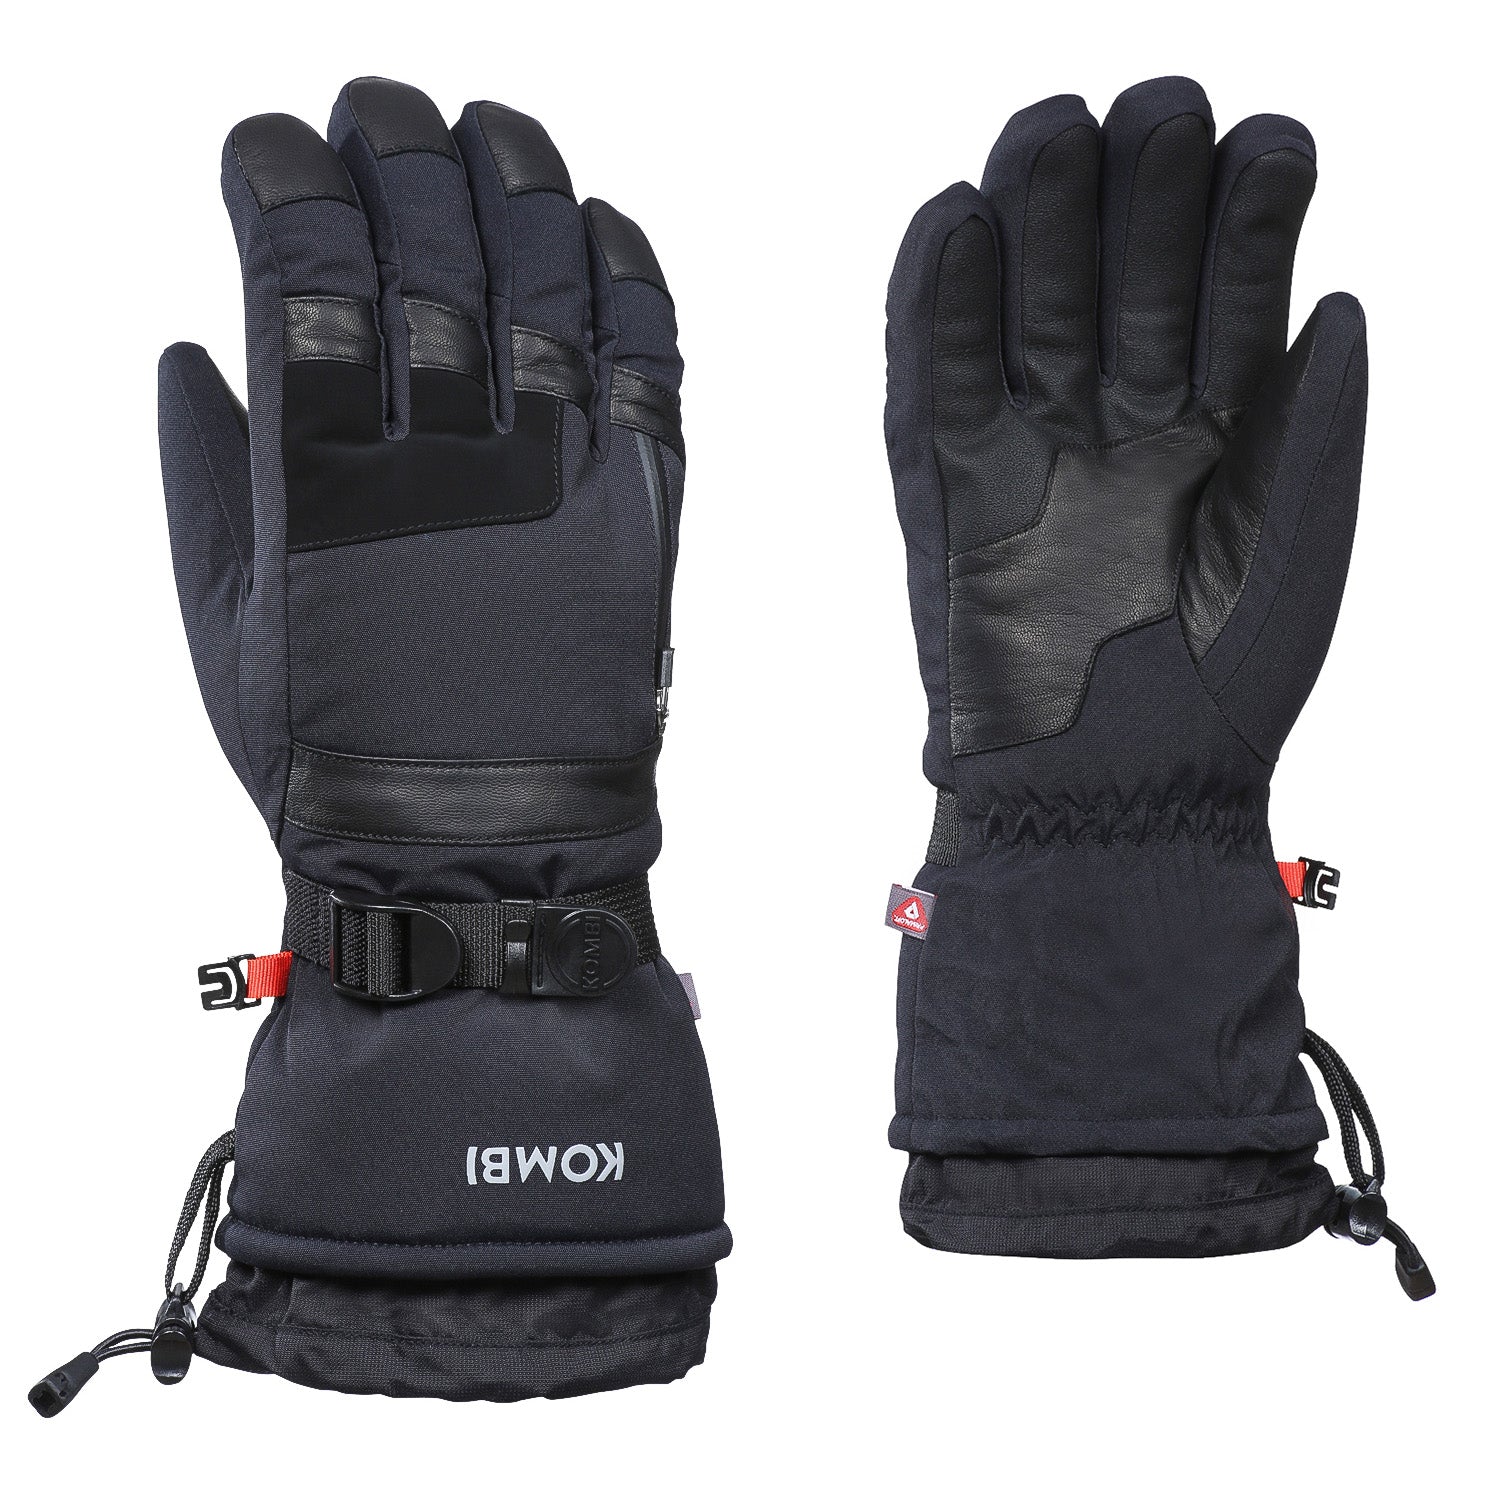 Men's Gloves & Mitts - Outdoors Oriented